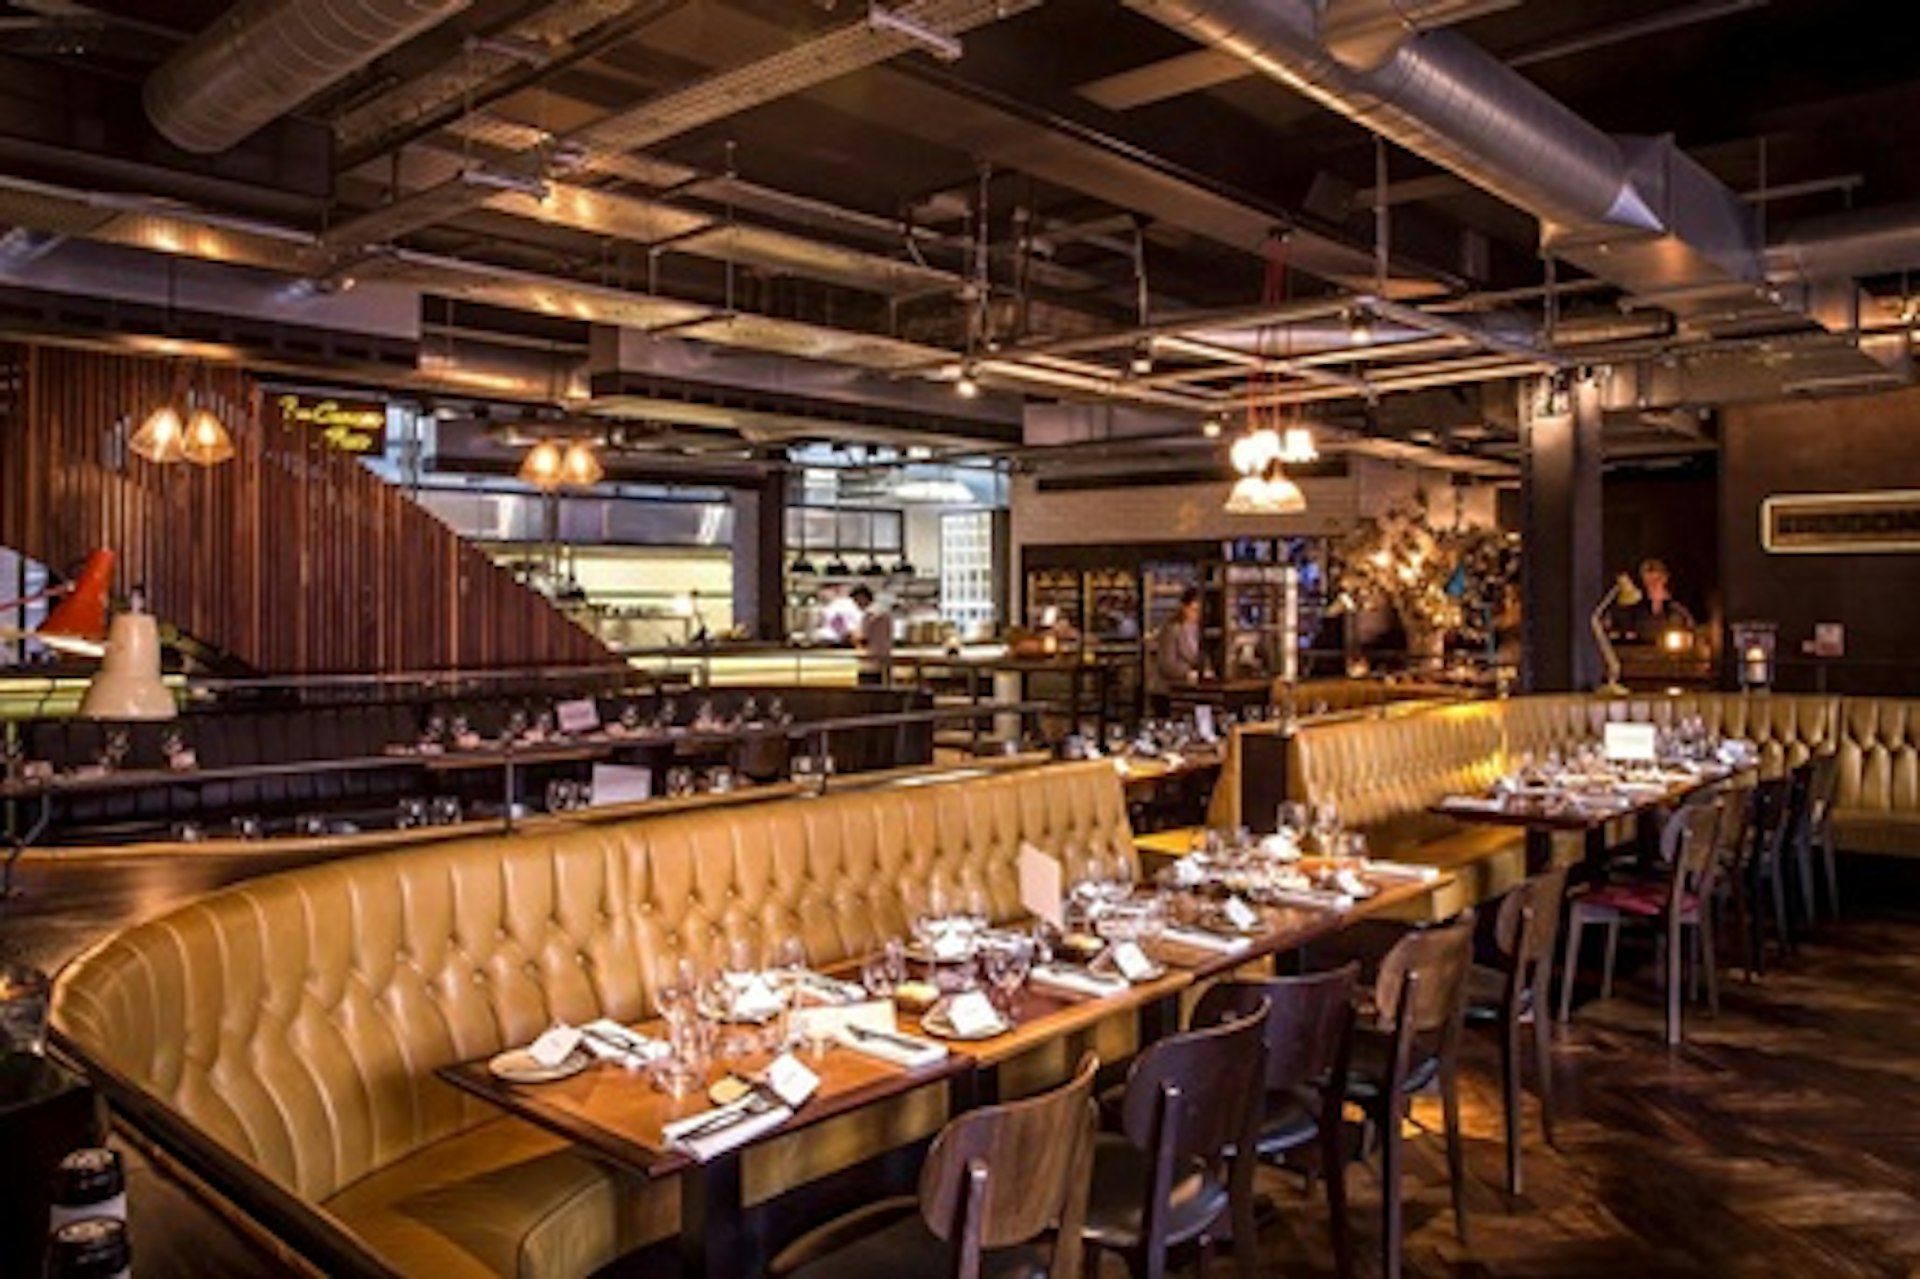 Kitchen Table Experience with Five Course Meal for Four at Gordon Ramsay's Heddon Street Kitchen 4